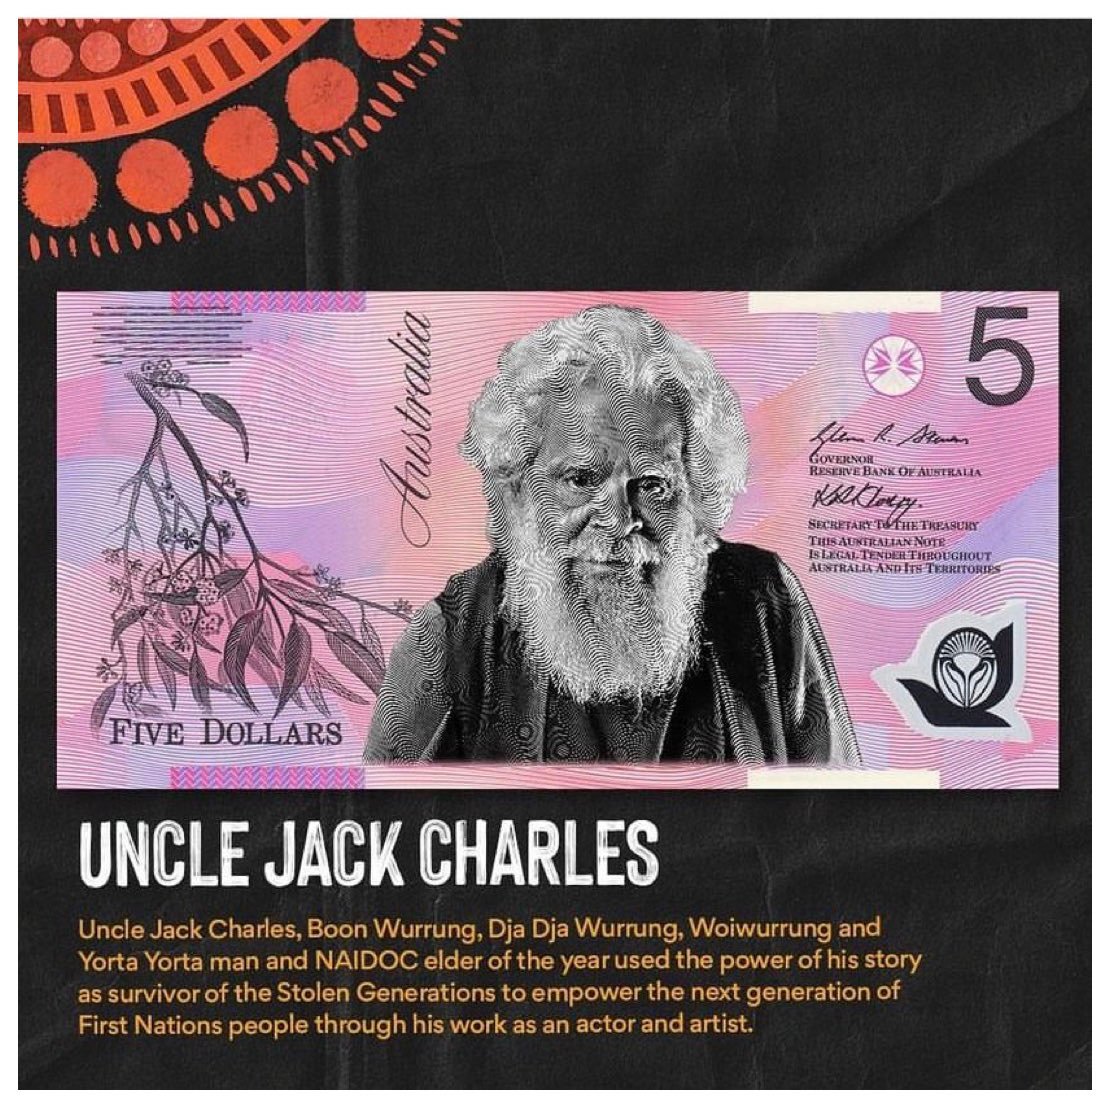 Two Charles for currency